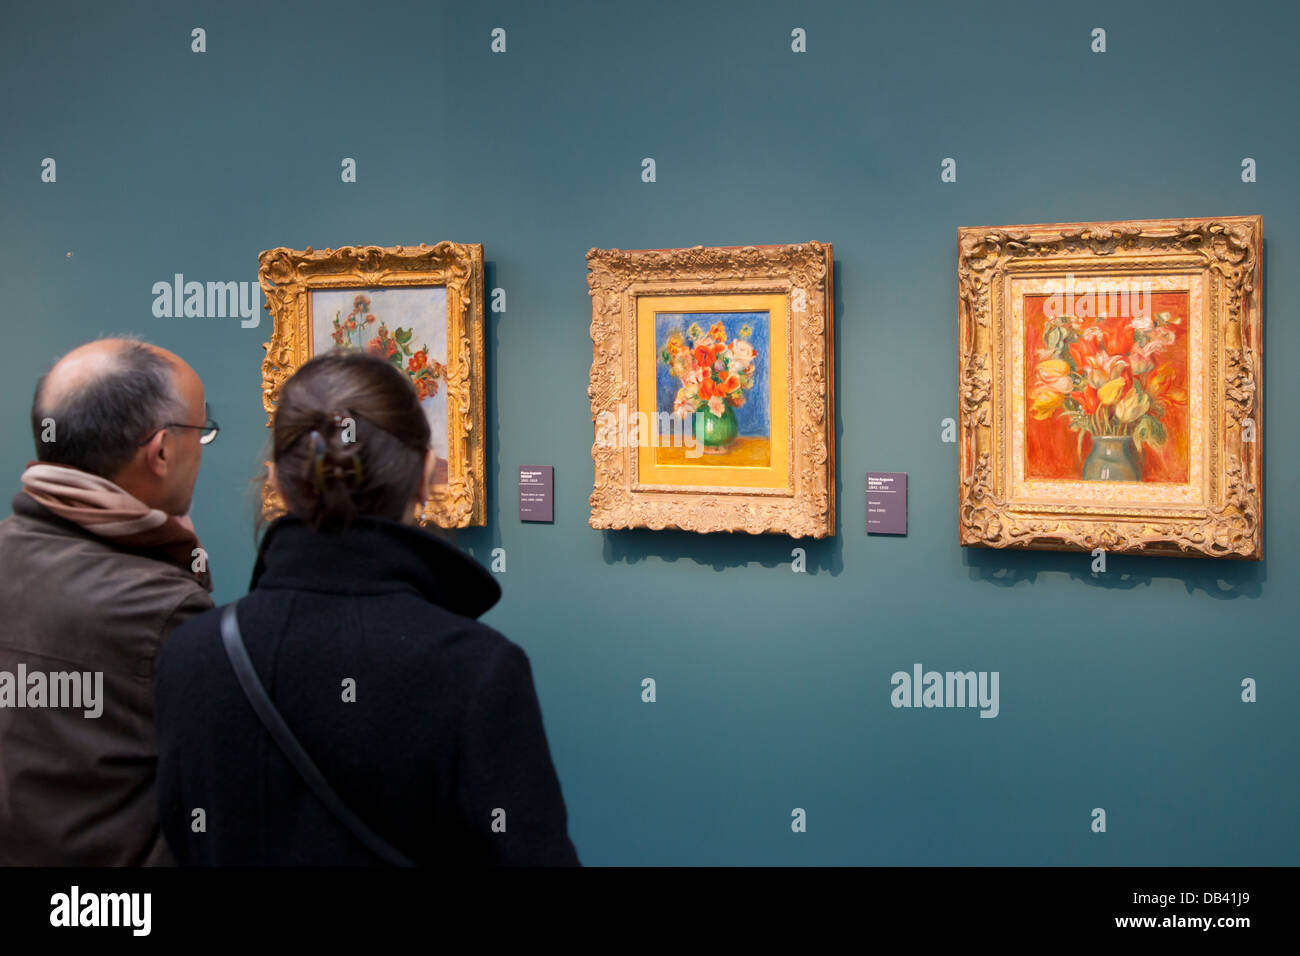 Couple viewing a series of floral paintings by Renoir in the Musee de l'Orangerie, Paris France Stock Photo